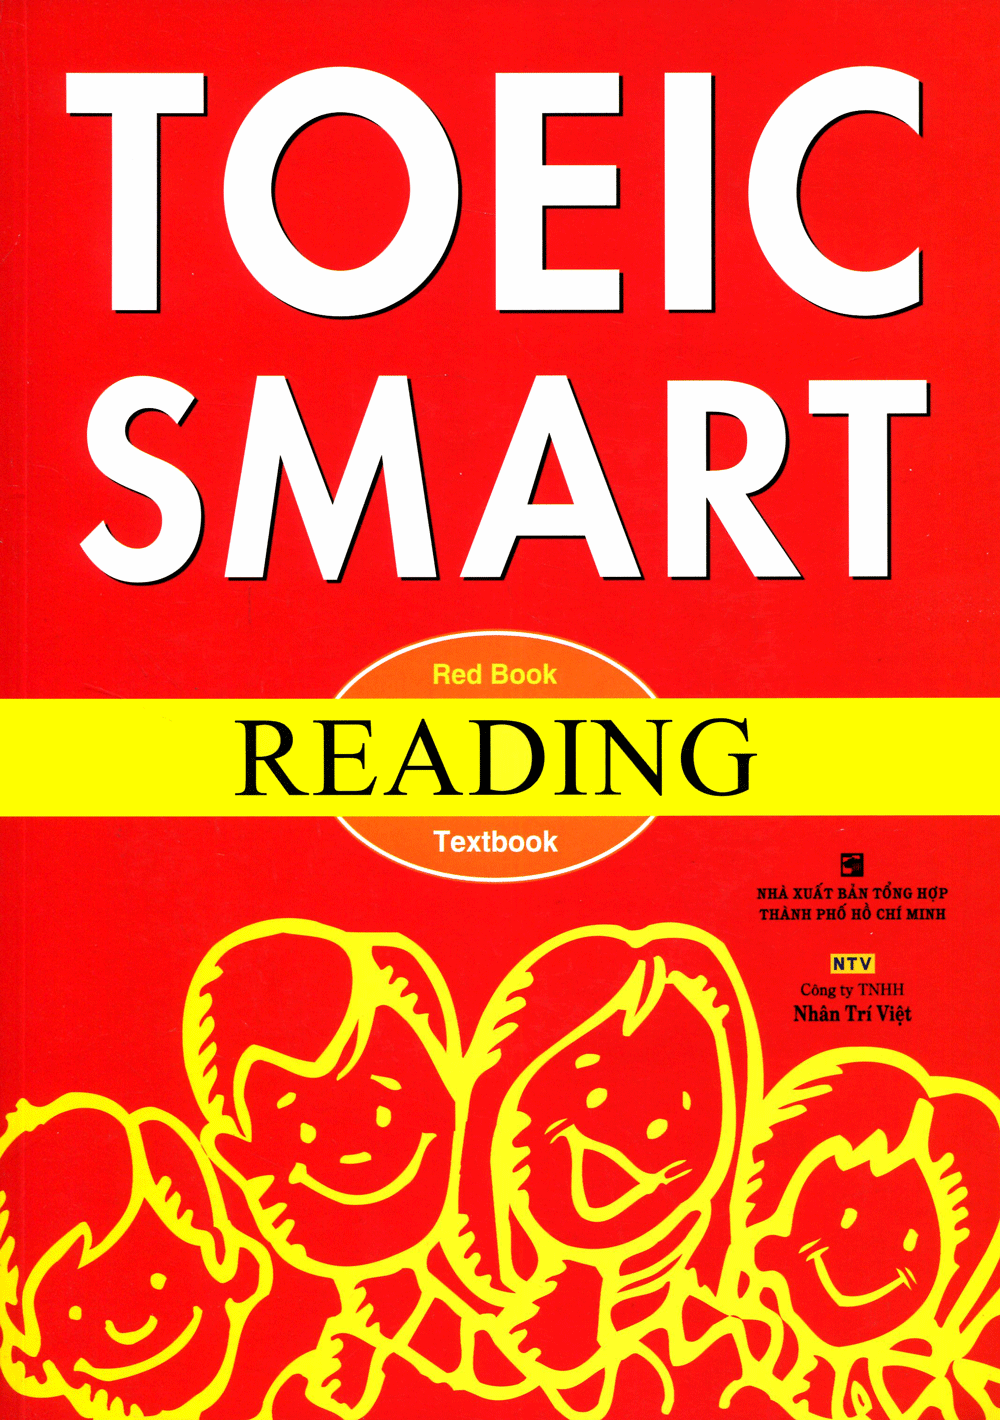 Toeic Smart - Red Book Reading